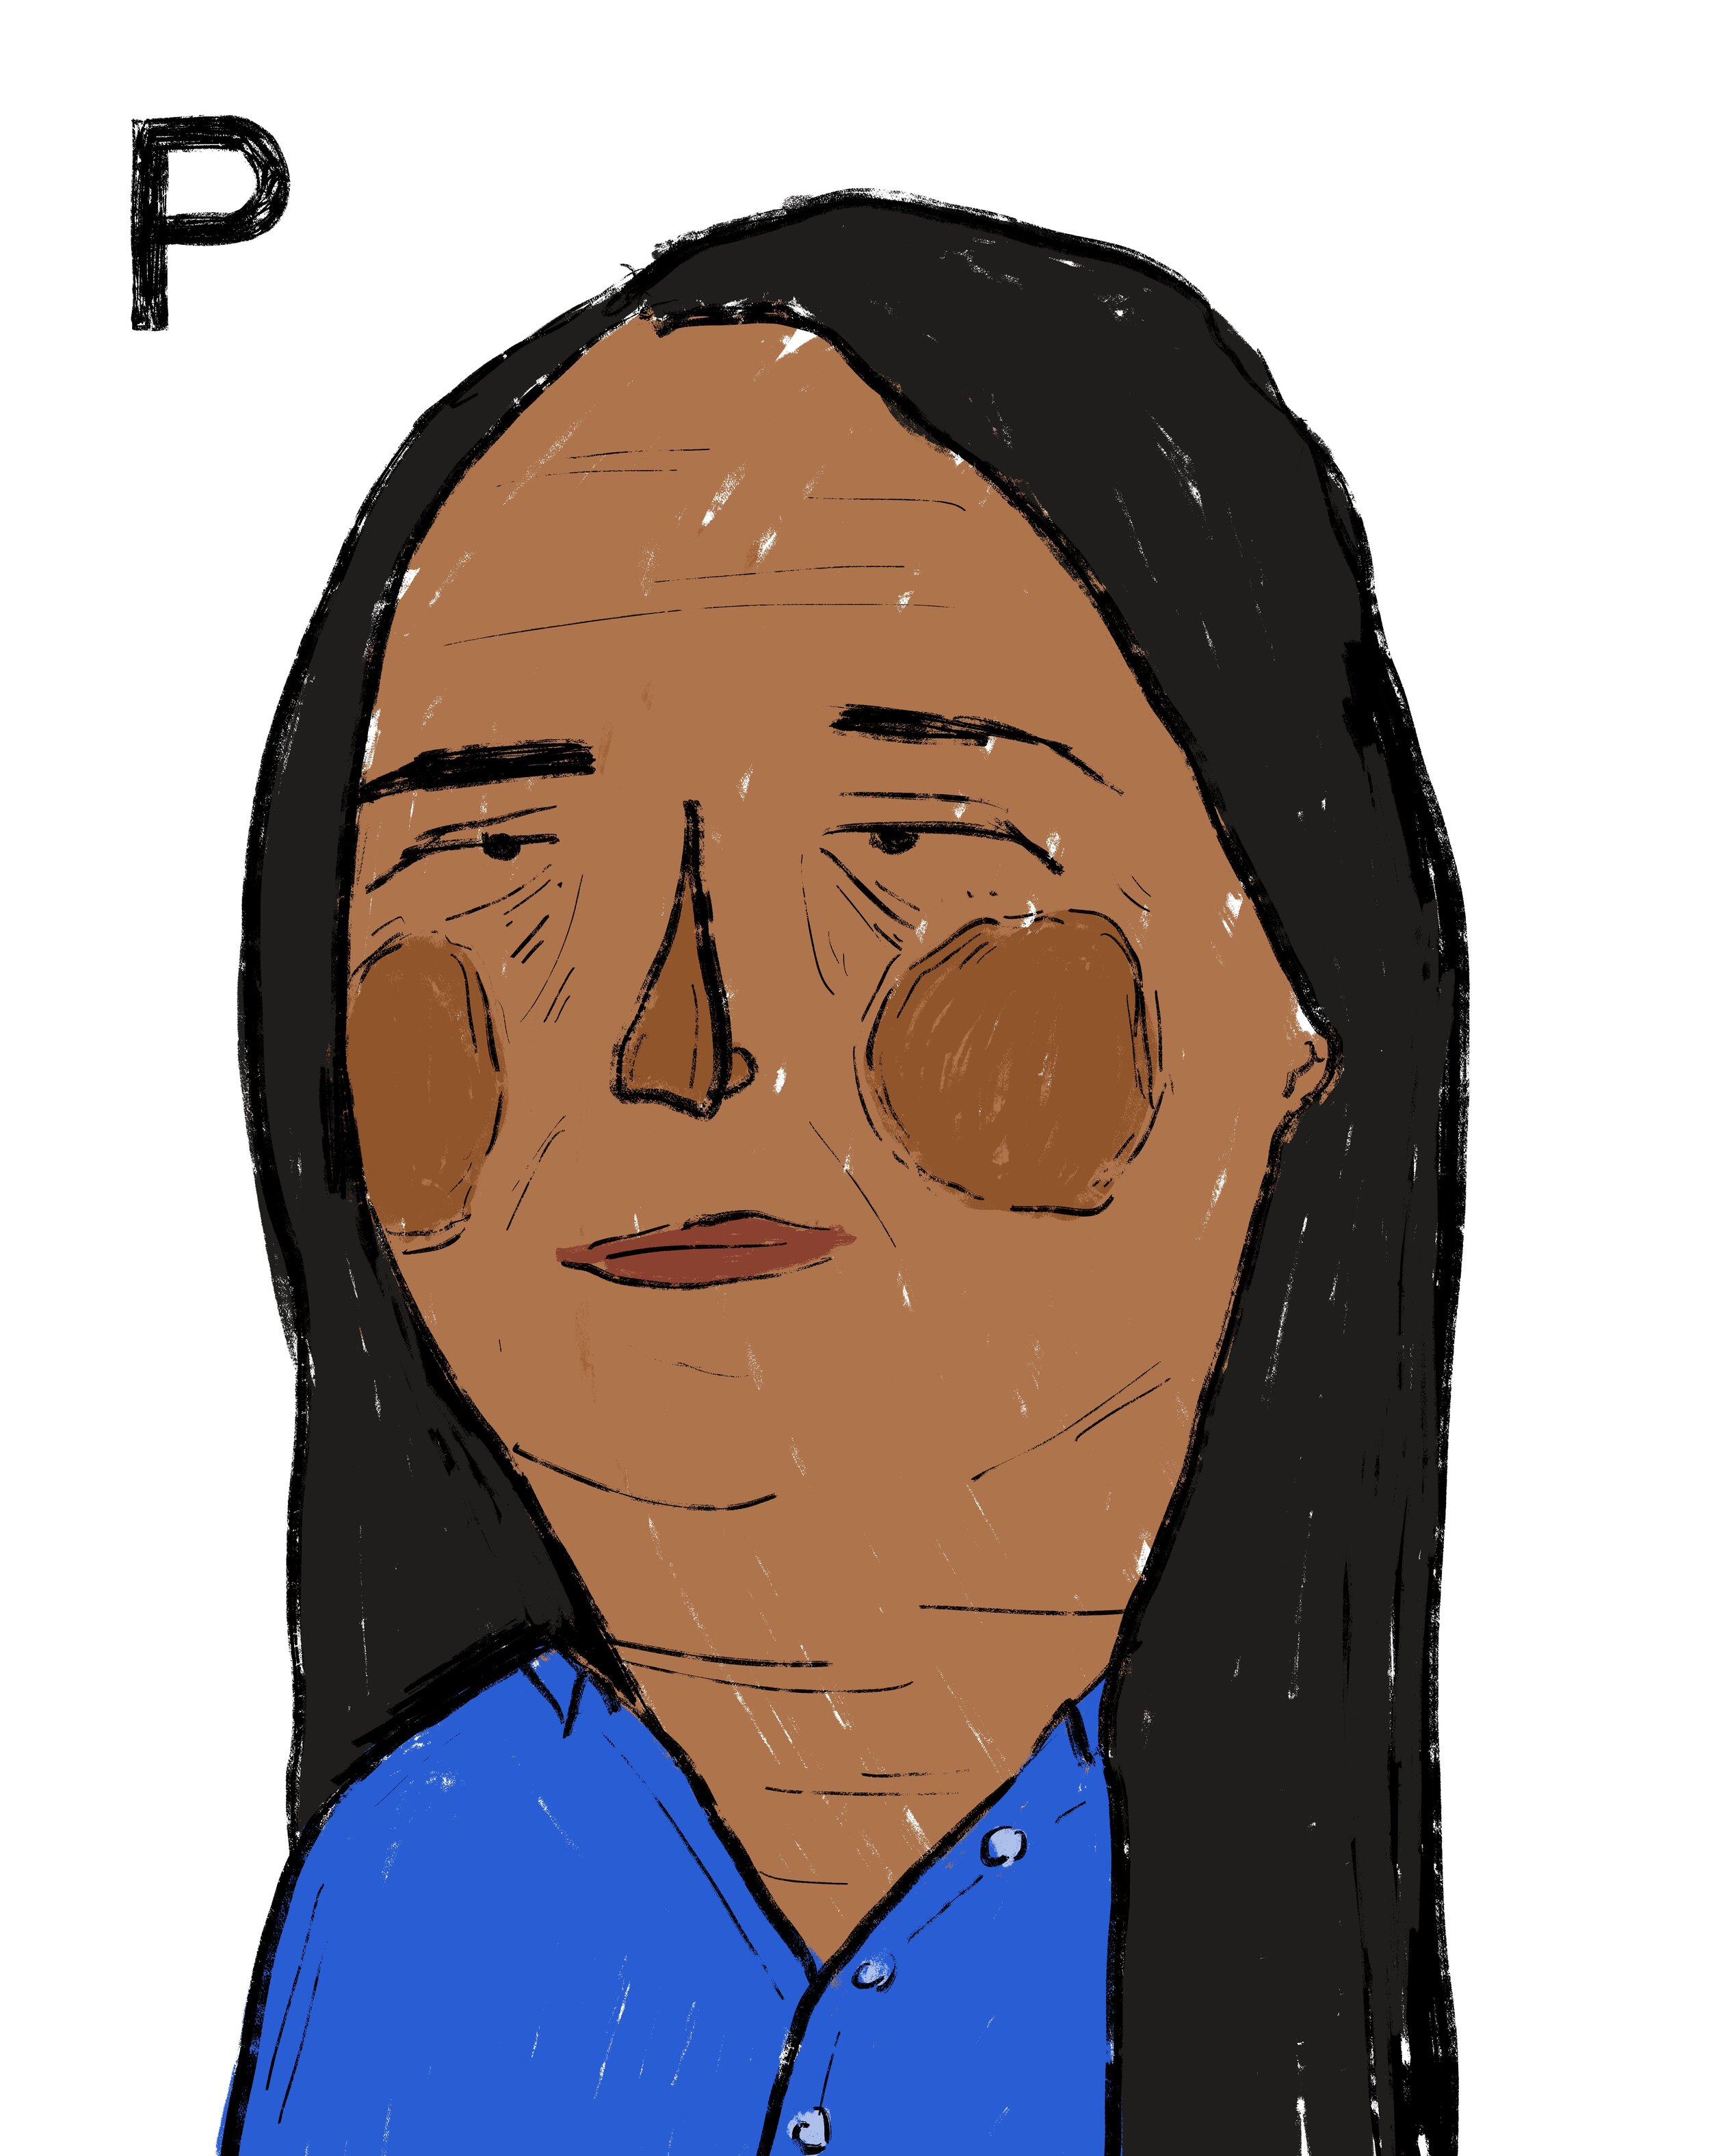 P is for Pacita Abad